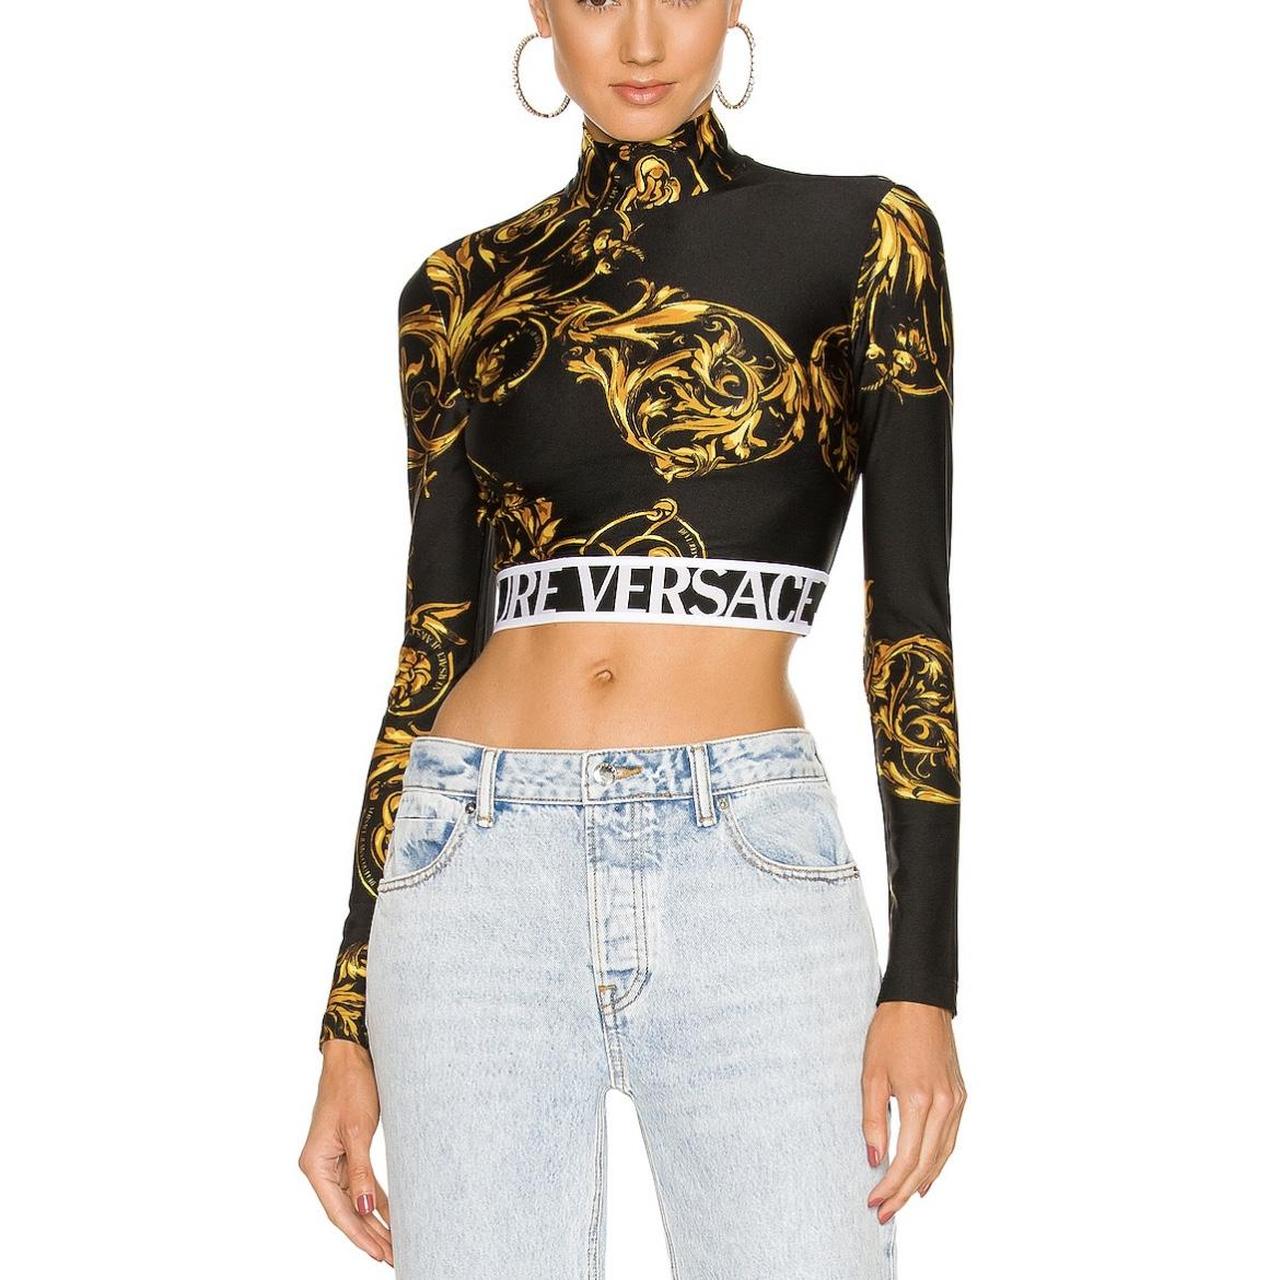 Versace Jeans Couture Women's Black and Yellow Crop-top | Depop